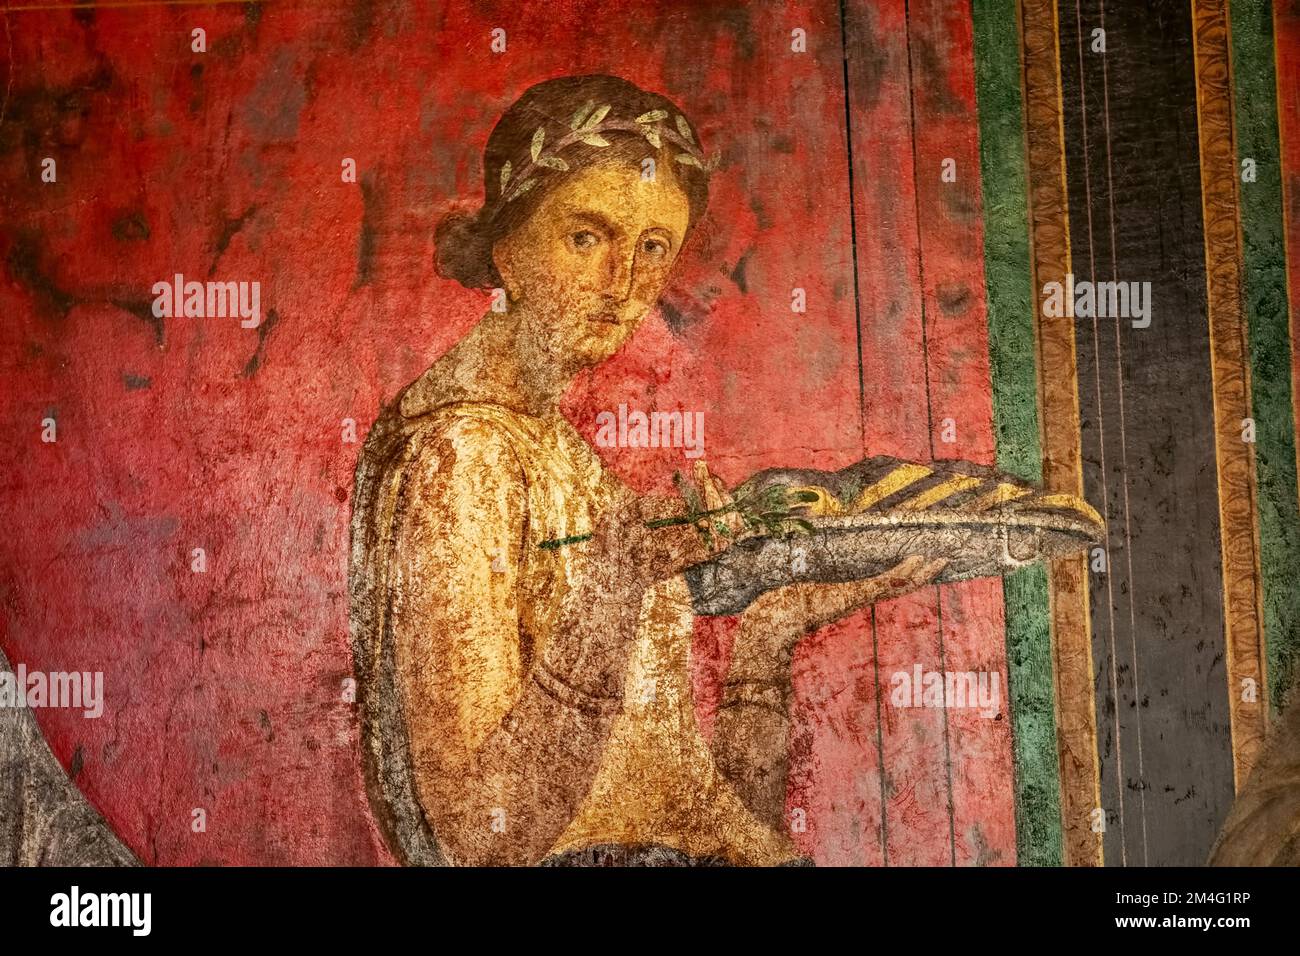 Ancient Roman fresco in Pompeii showing a detail of the mystery cult of Dionysus Stock Photo